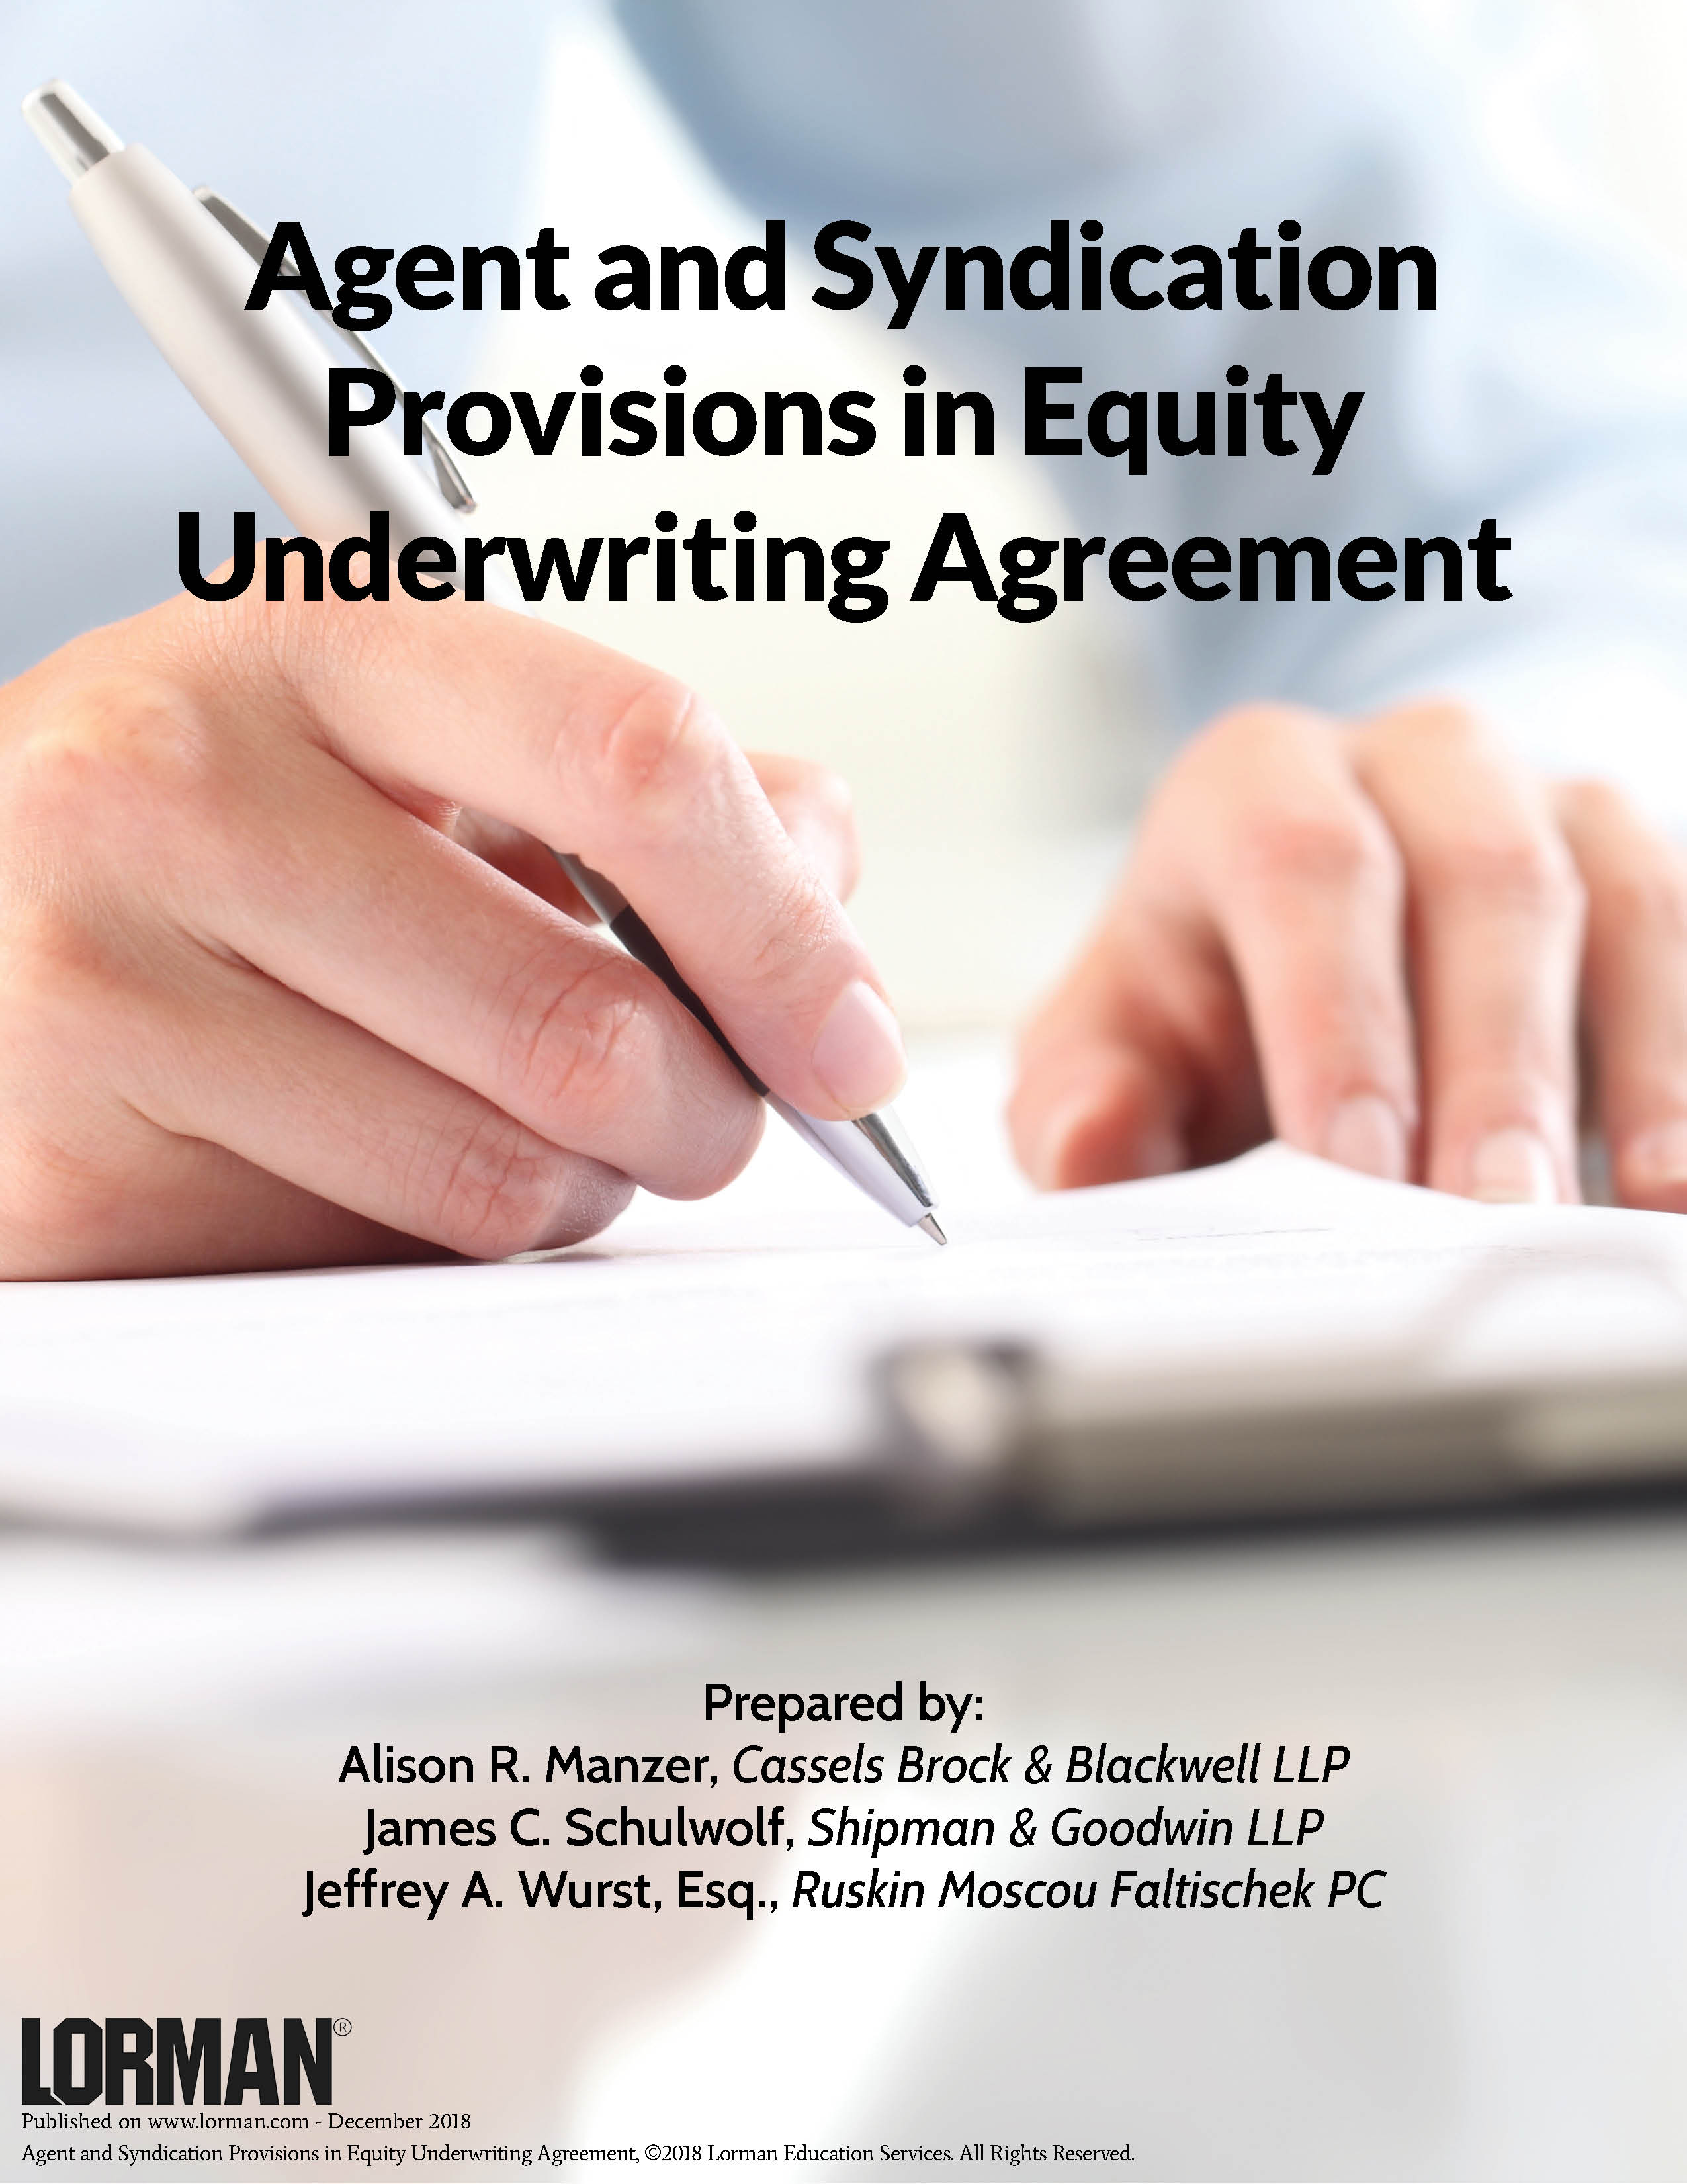 Agent and Syndication Provisions in Equity Underwriting Agreement